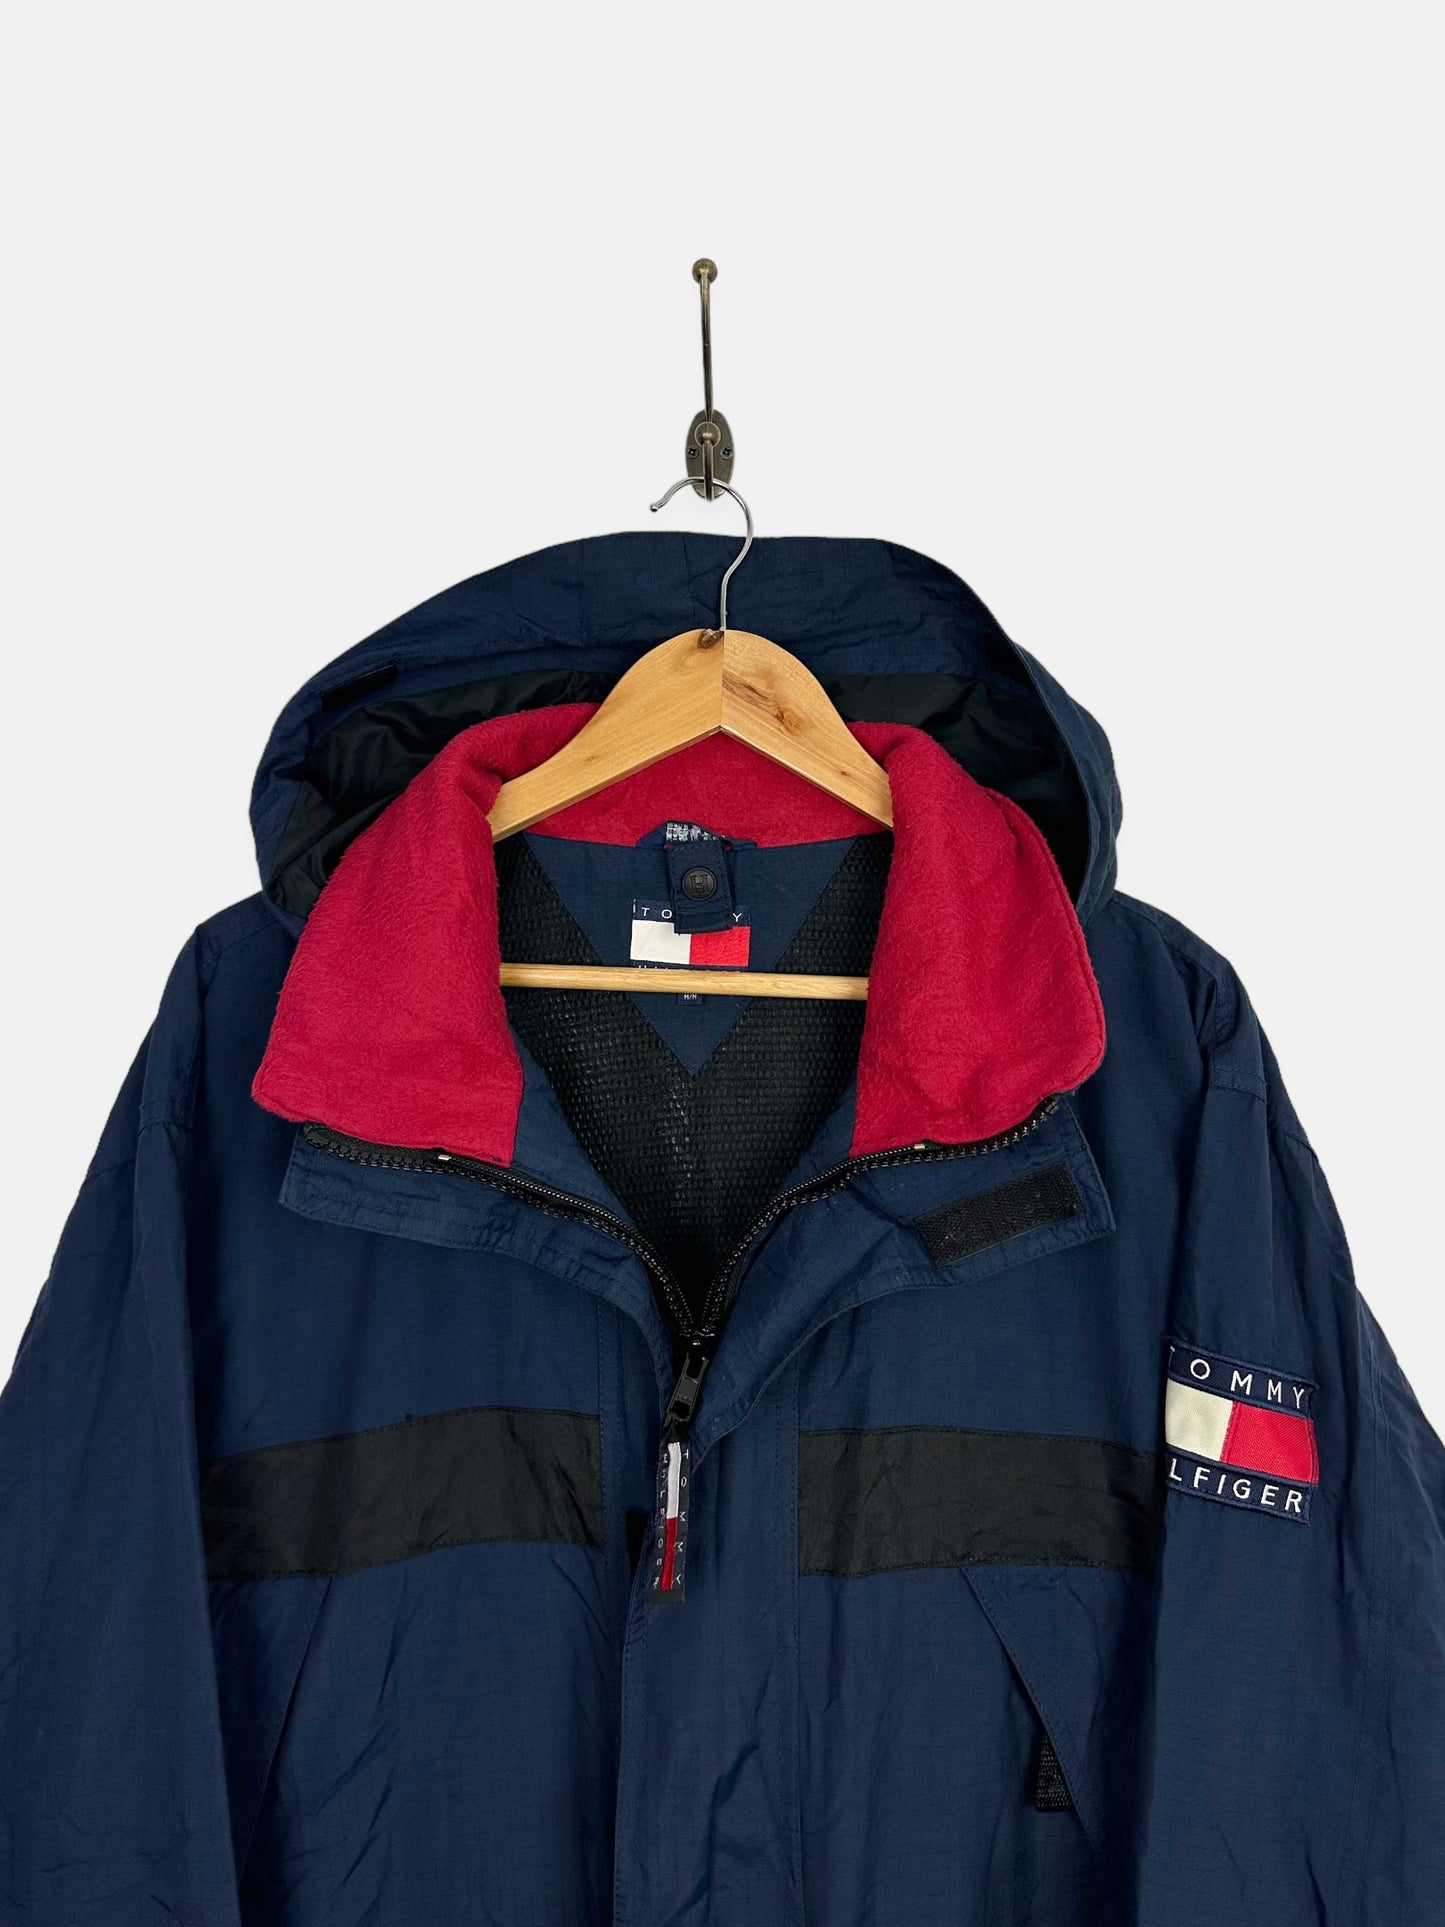 90's Tommy Hilfiger Embroidered Vintage Jacket with Hood Size 2XL